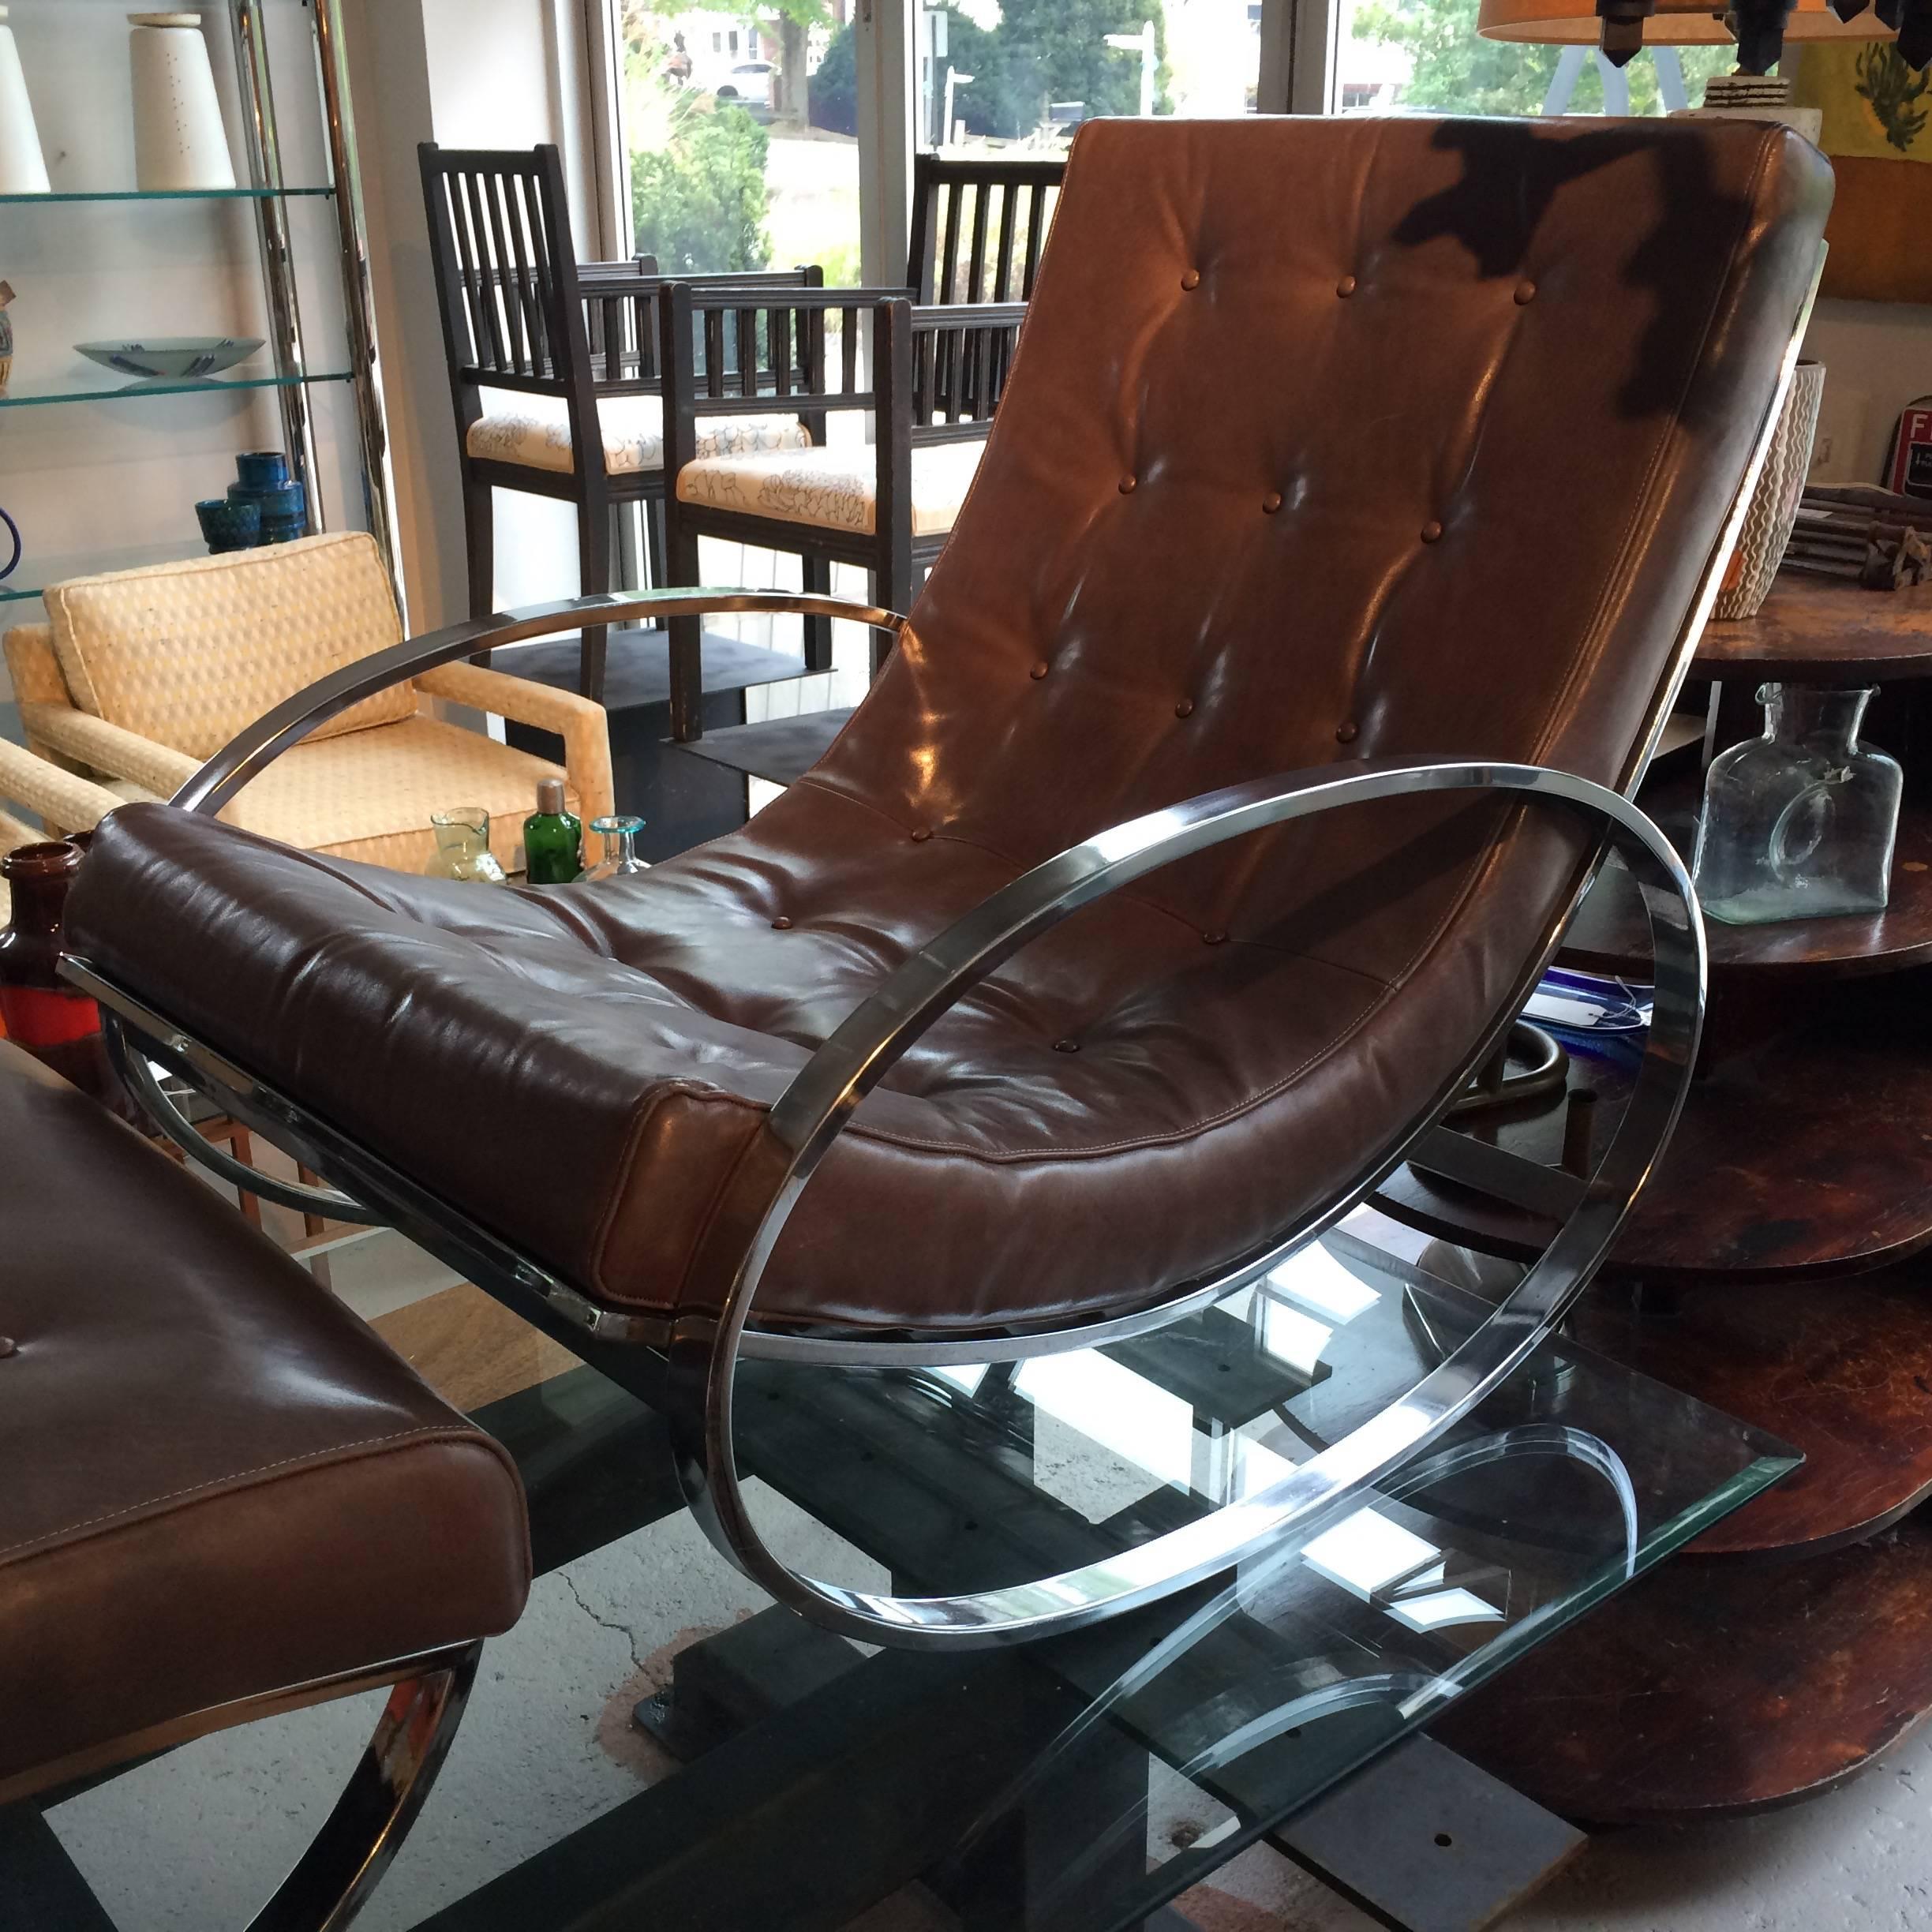 Original 1970s Renato Zevi for Selig Ellipse Lounge Chair Rocker and Ottoman; substantial chrome frame; reupholstered in a medium gray leather in excellent condition. 
Measurements are for the chair; rocking foot rest is 27L, 26W, 14H, please